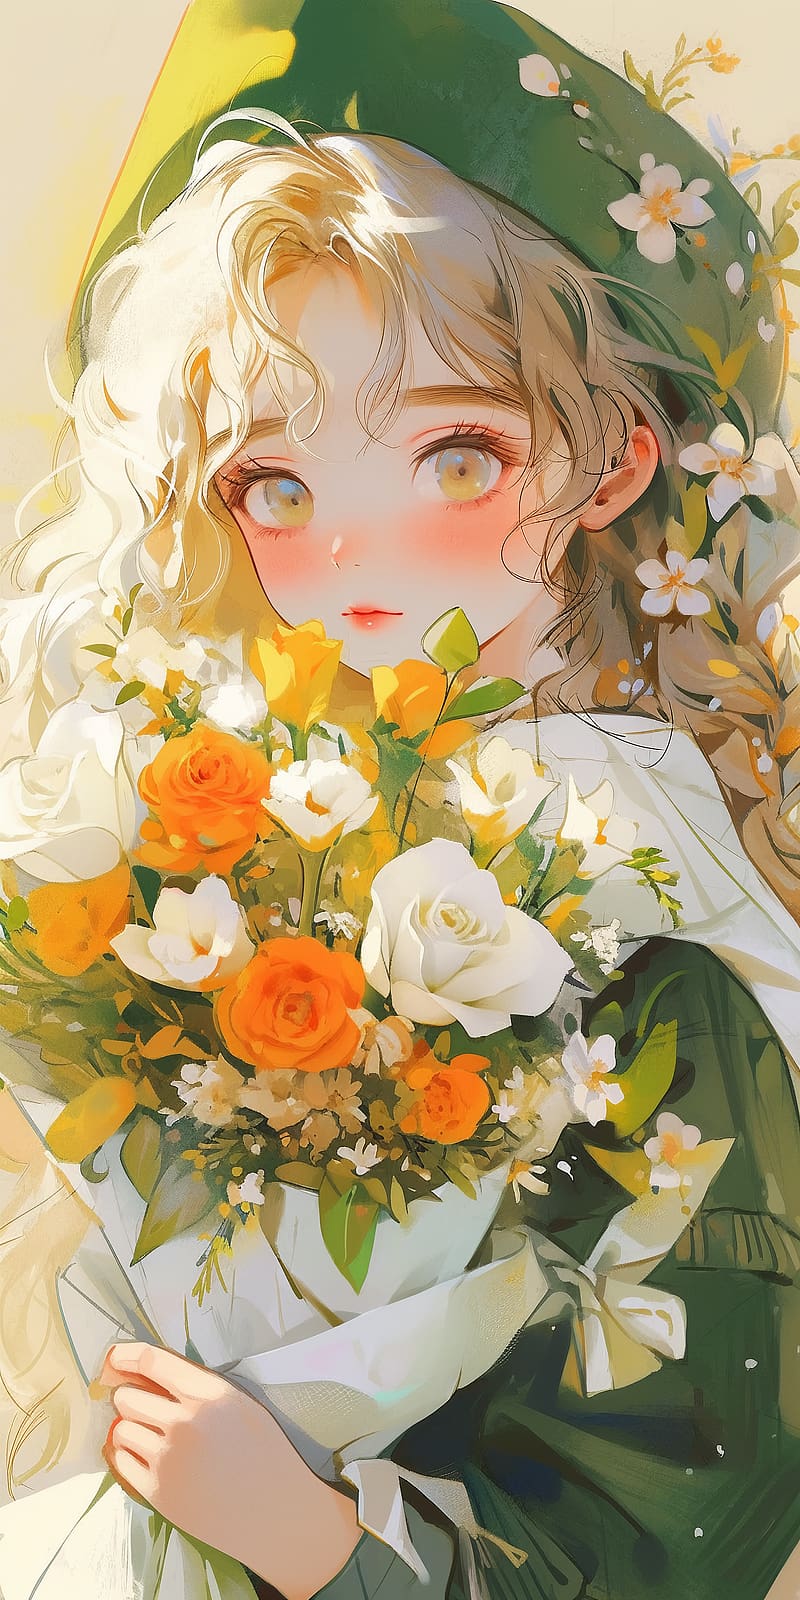 Anime Boy Holding a Bouquet of Yellow Flowers